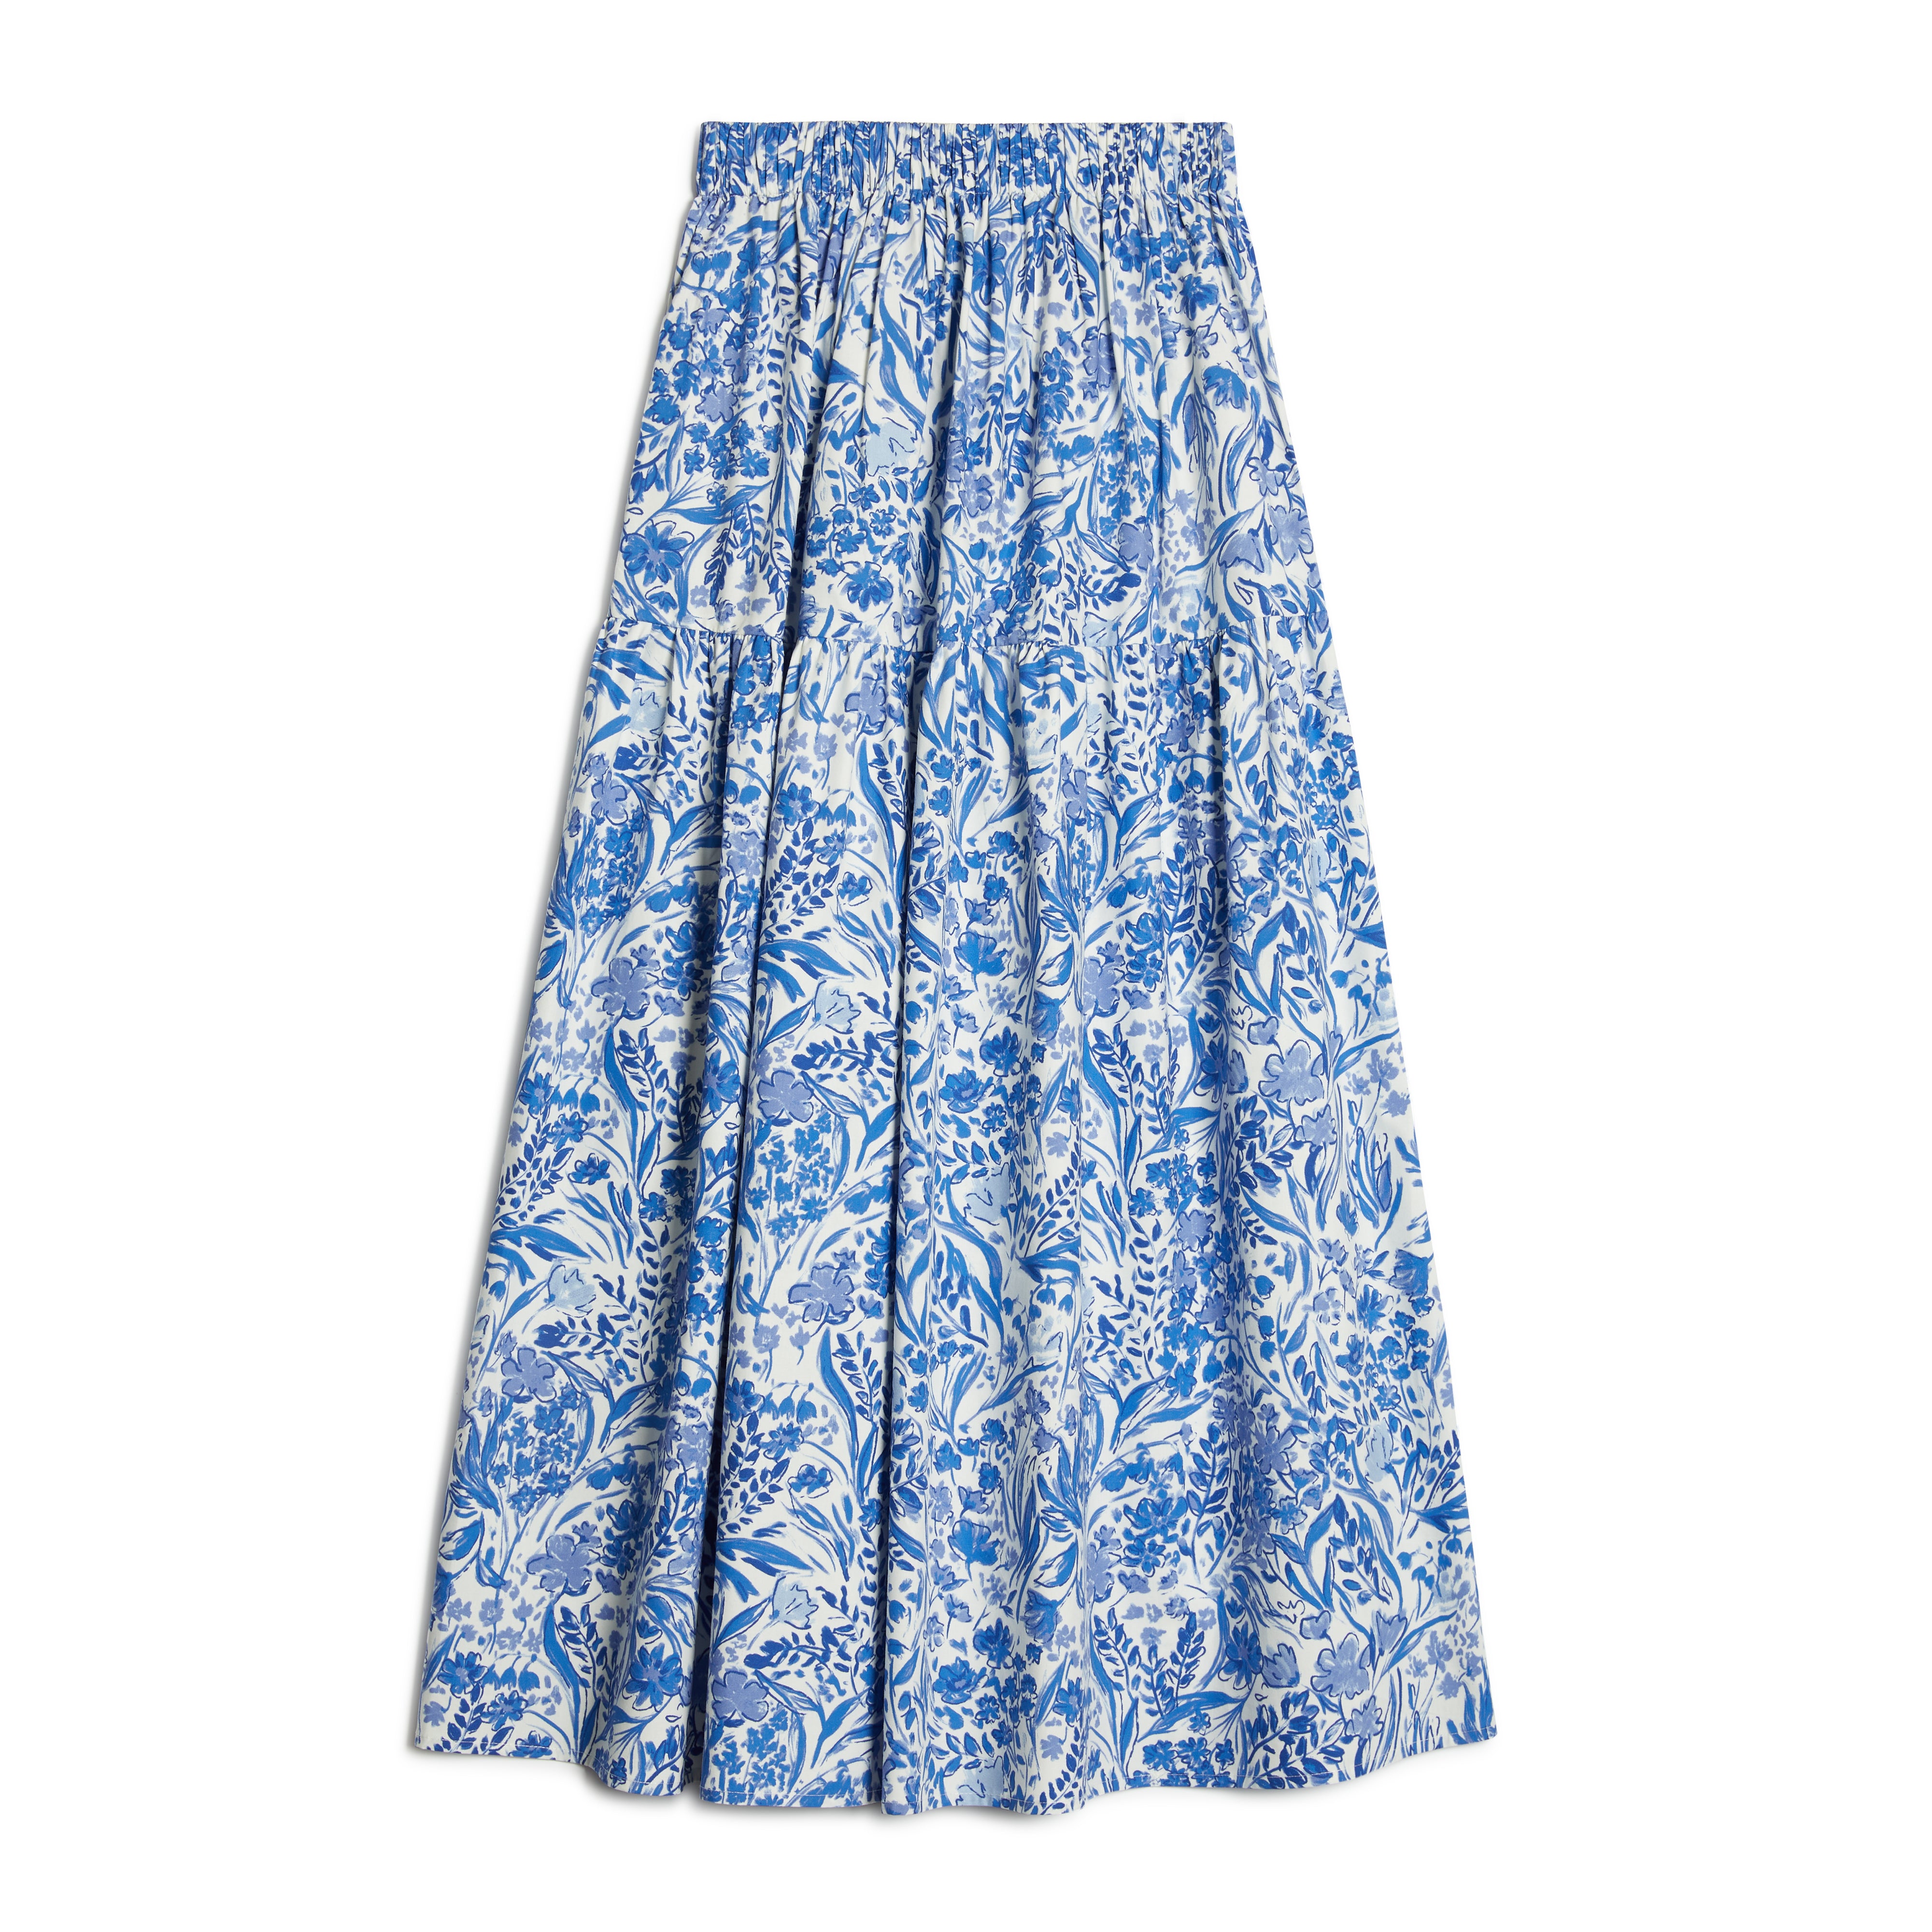 Painted Meadow Organic Cotton Skirt